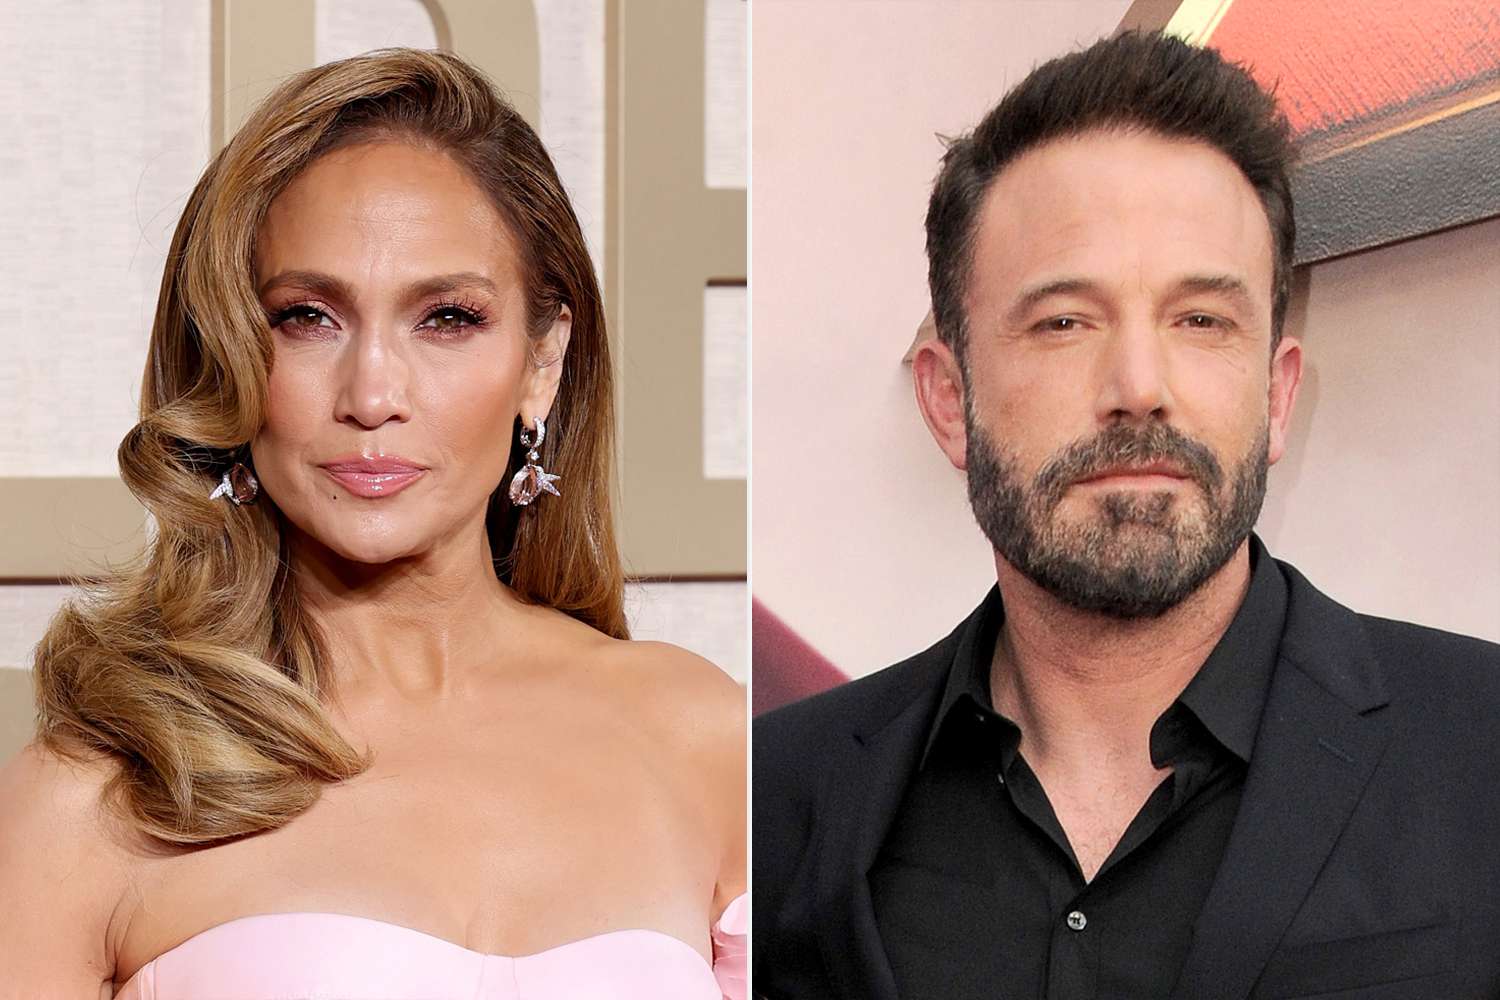 What's Next for Ben Affleck and Jennifer Lopez? From a Tour to a Film (Maybe) Starring Jennifer Garner